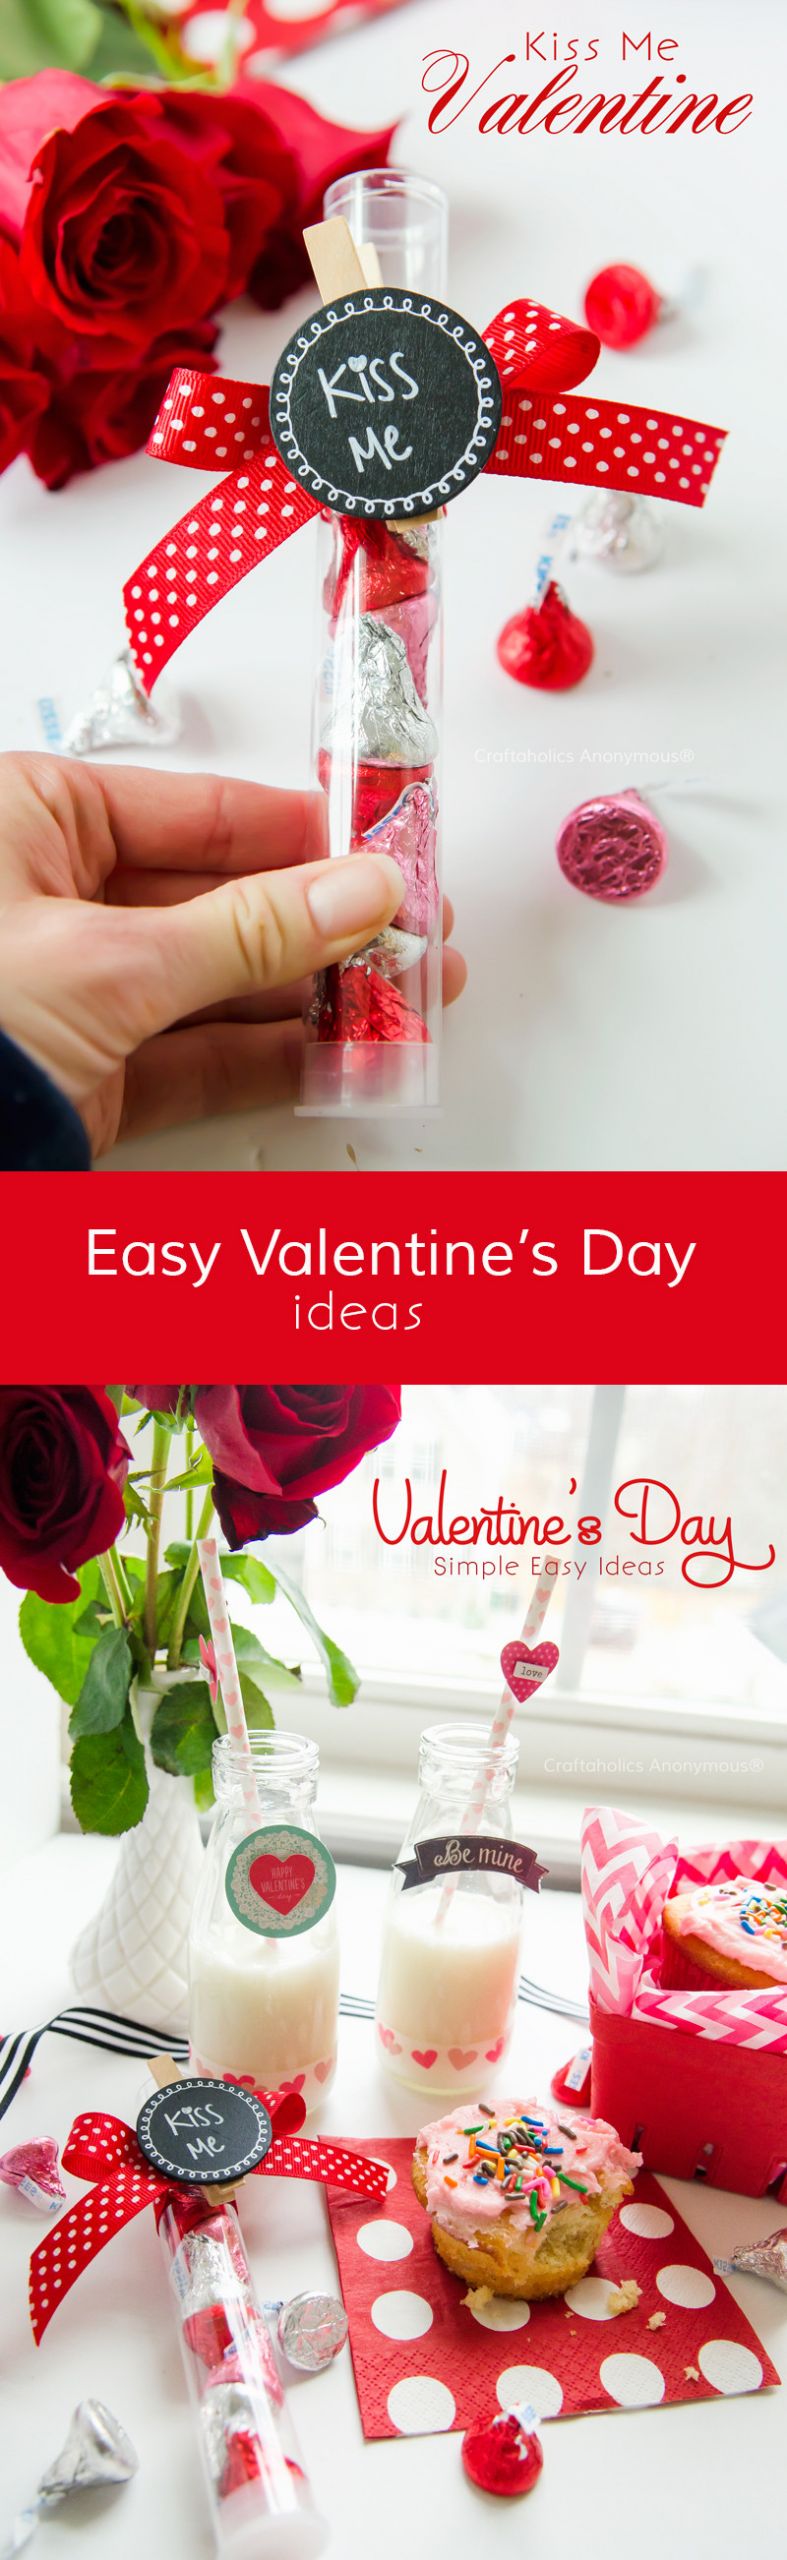 Cheap Valentines Day Date Ideas
 Craftaholics Anonymous